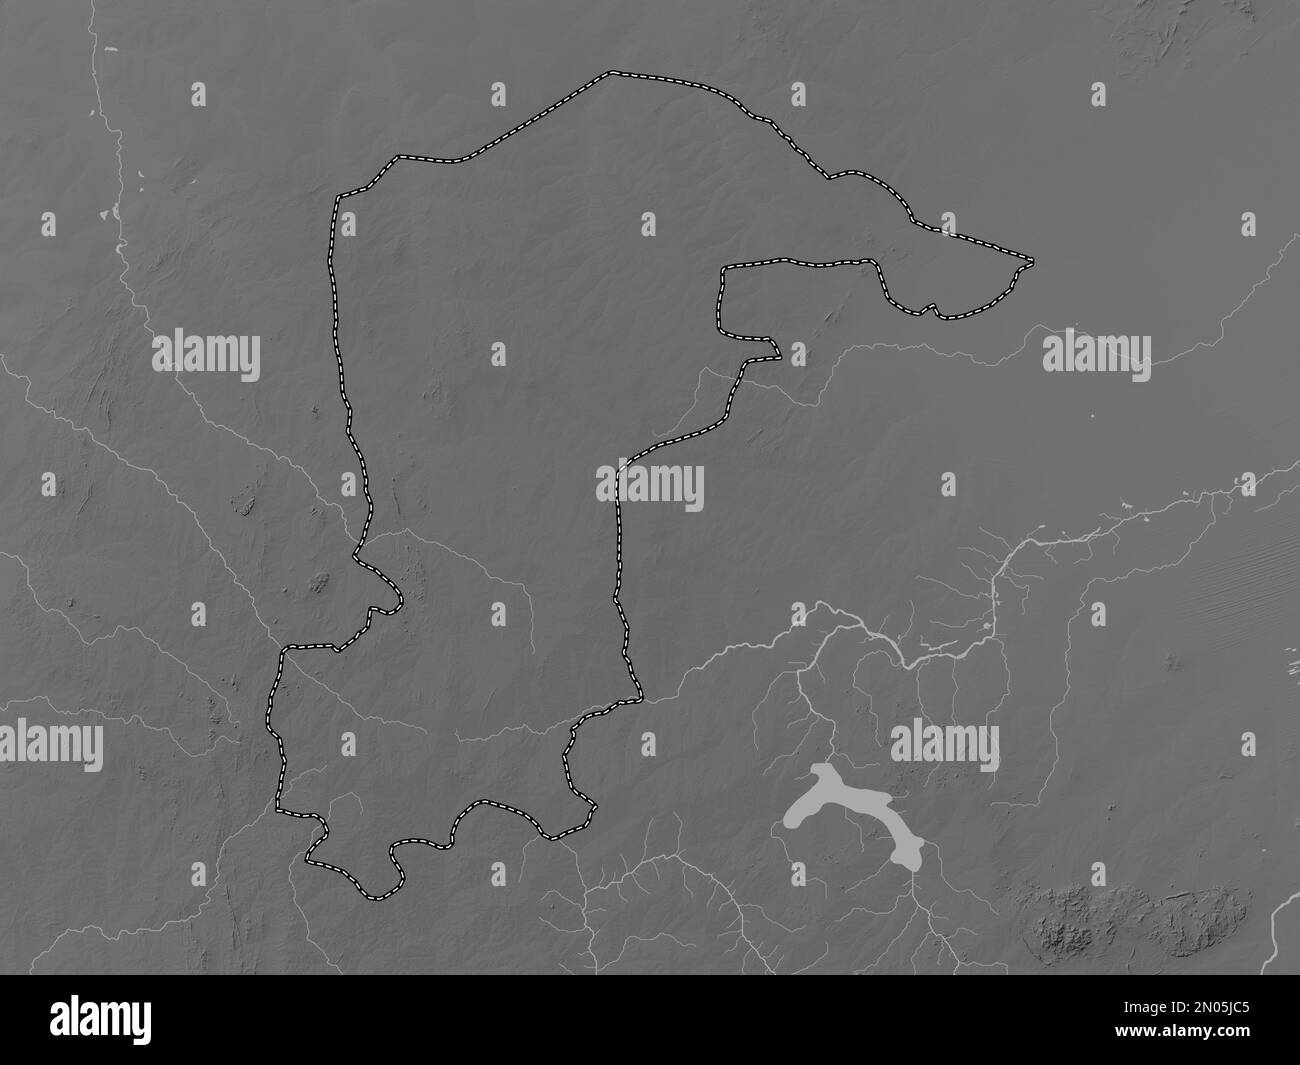 Katsina, state of Nigeria. Grayscale elevation map with lakes and rivers Stock Photo